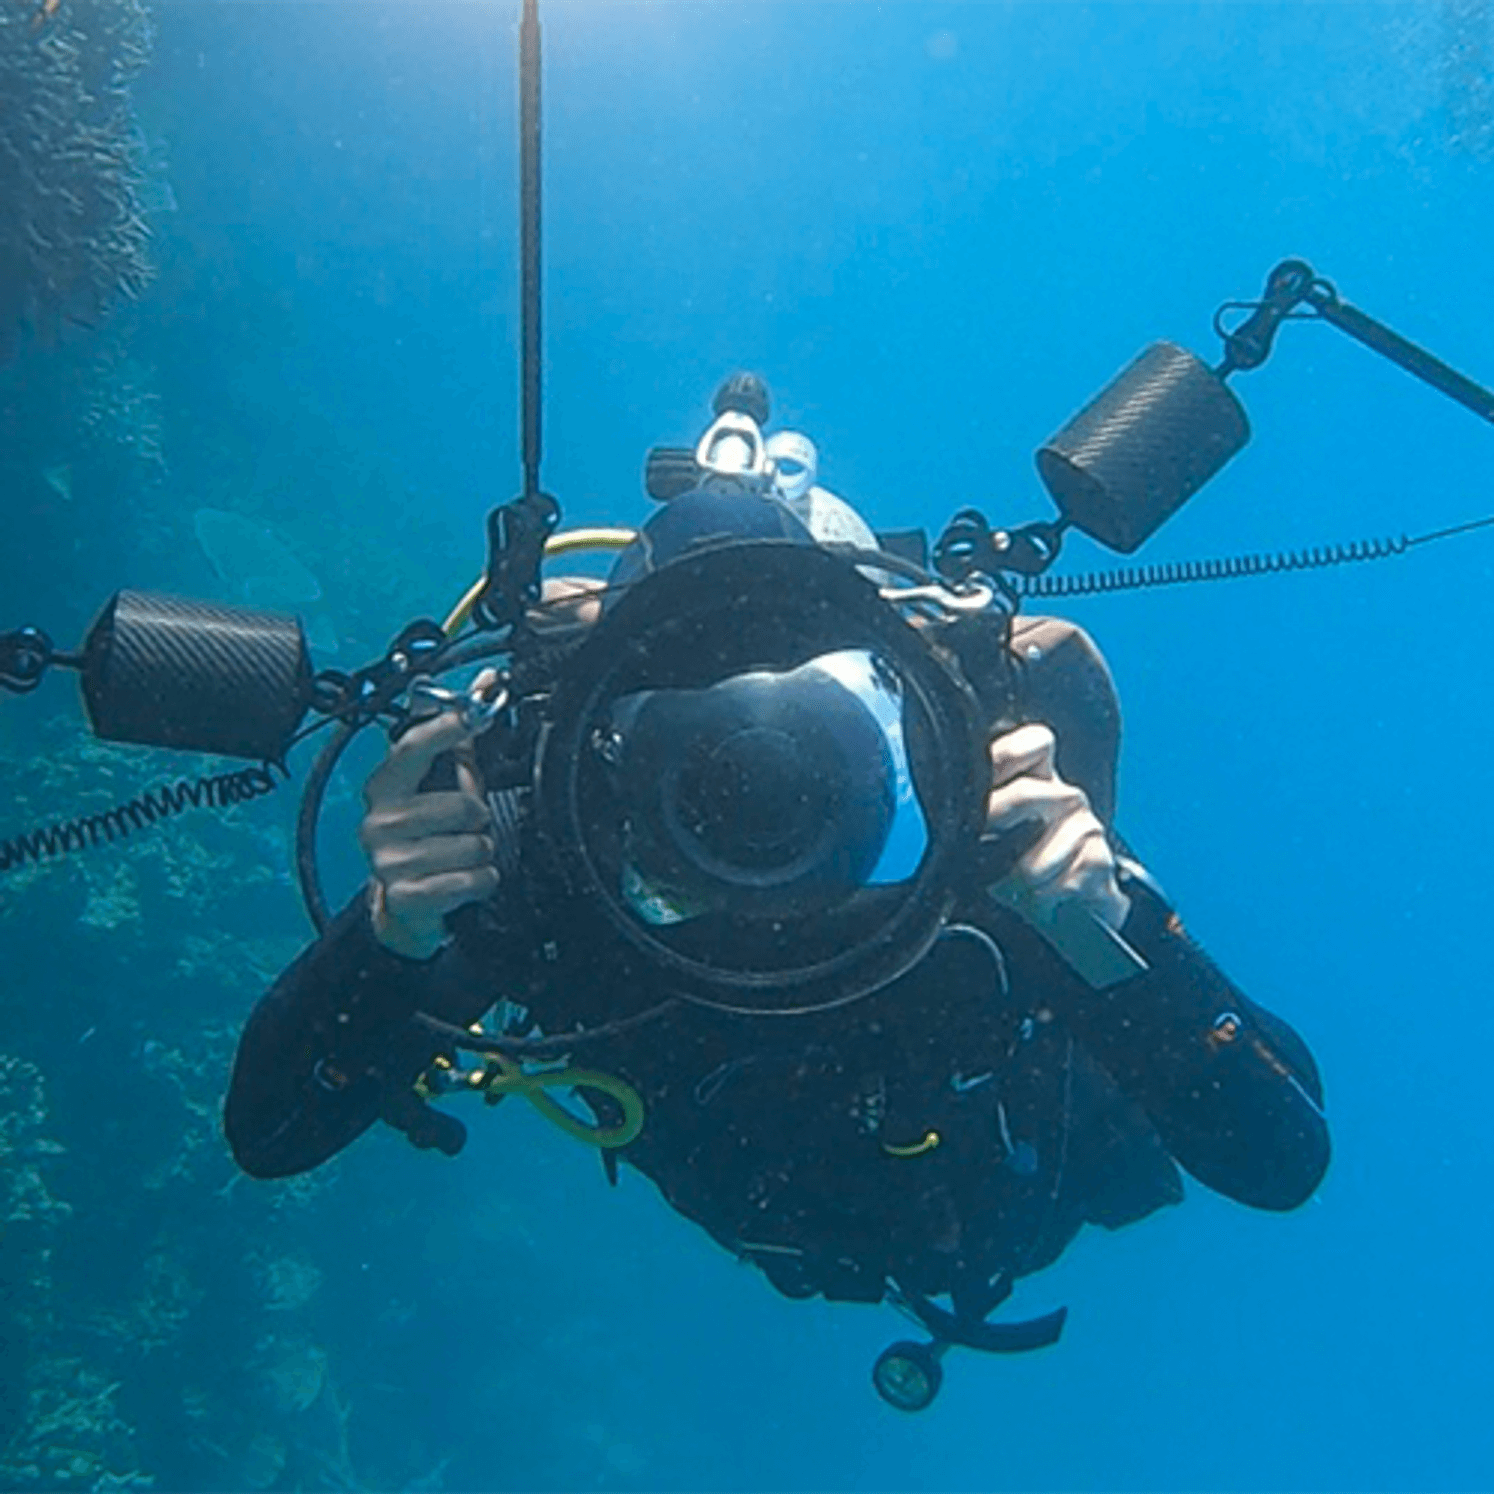 Diver underwater with camera